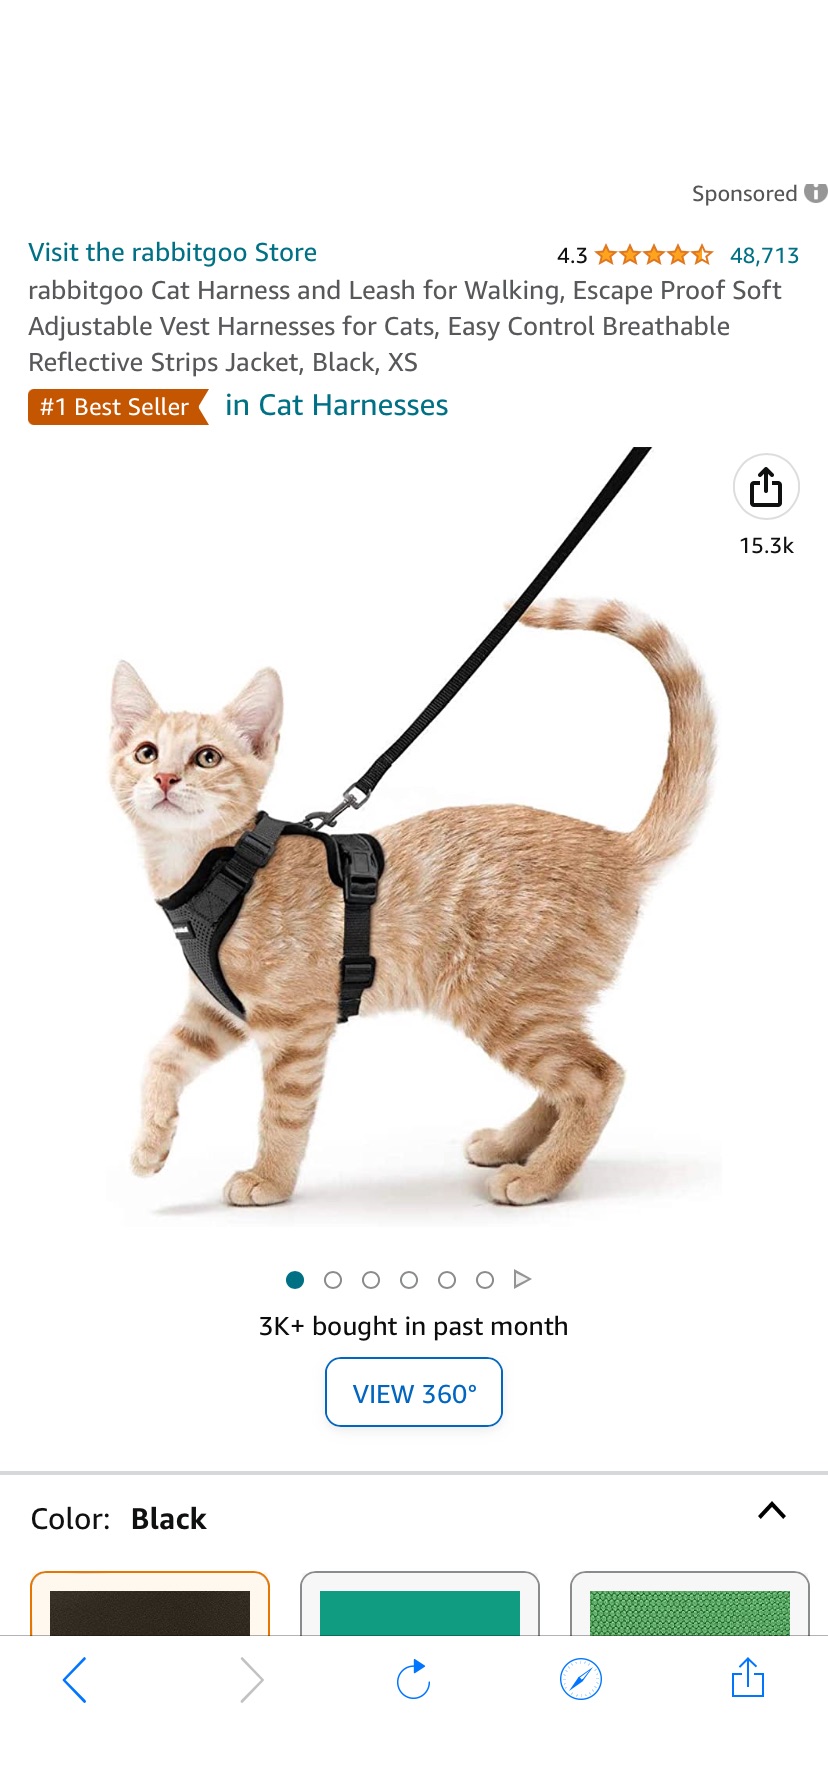 Pet Supplies : 遛猫绳rabbitgoo Cat Harness and Leash for Walking, Escape Proof Soft Adjustable Vest Harnesses for Cats, Easy Control Breathable Reflective Strips Jacket, Black, XS : Amazon.com